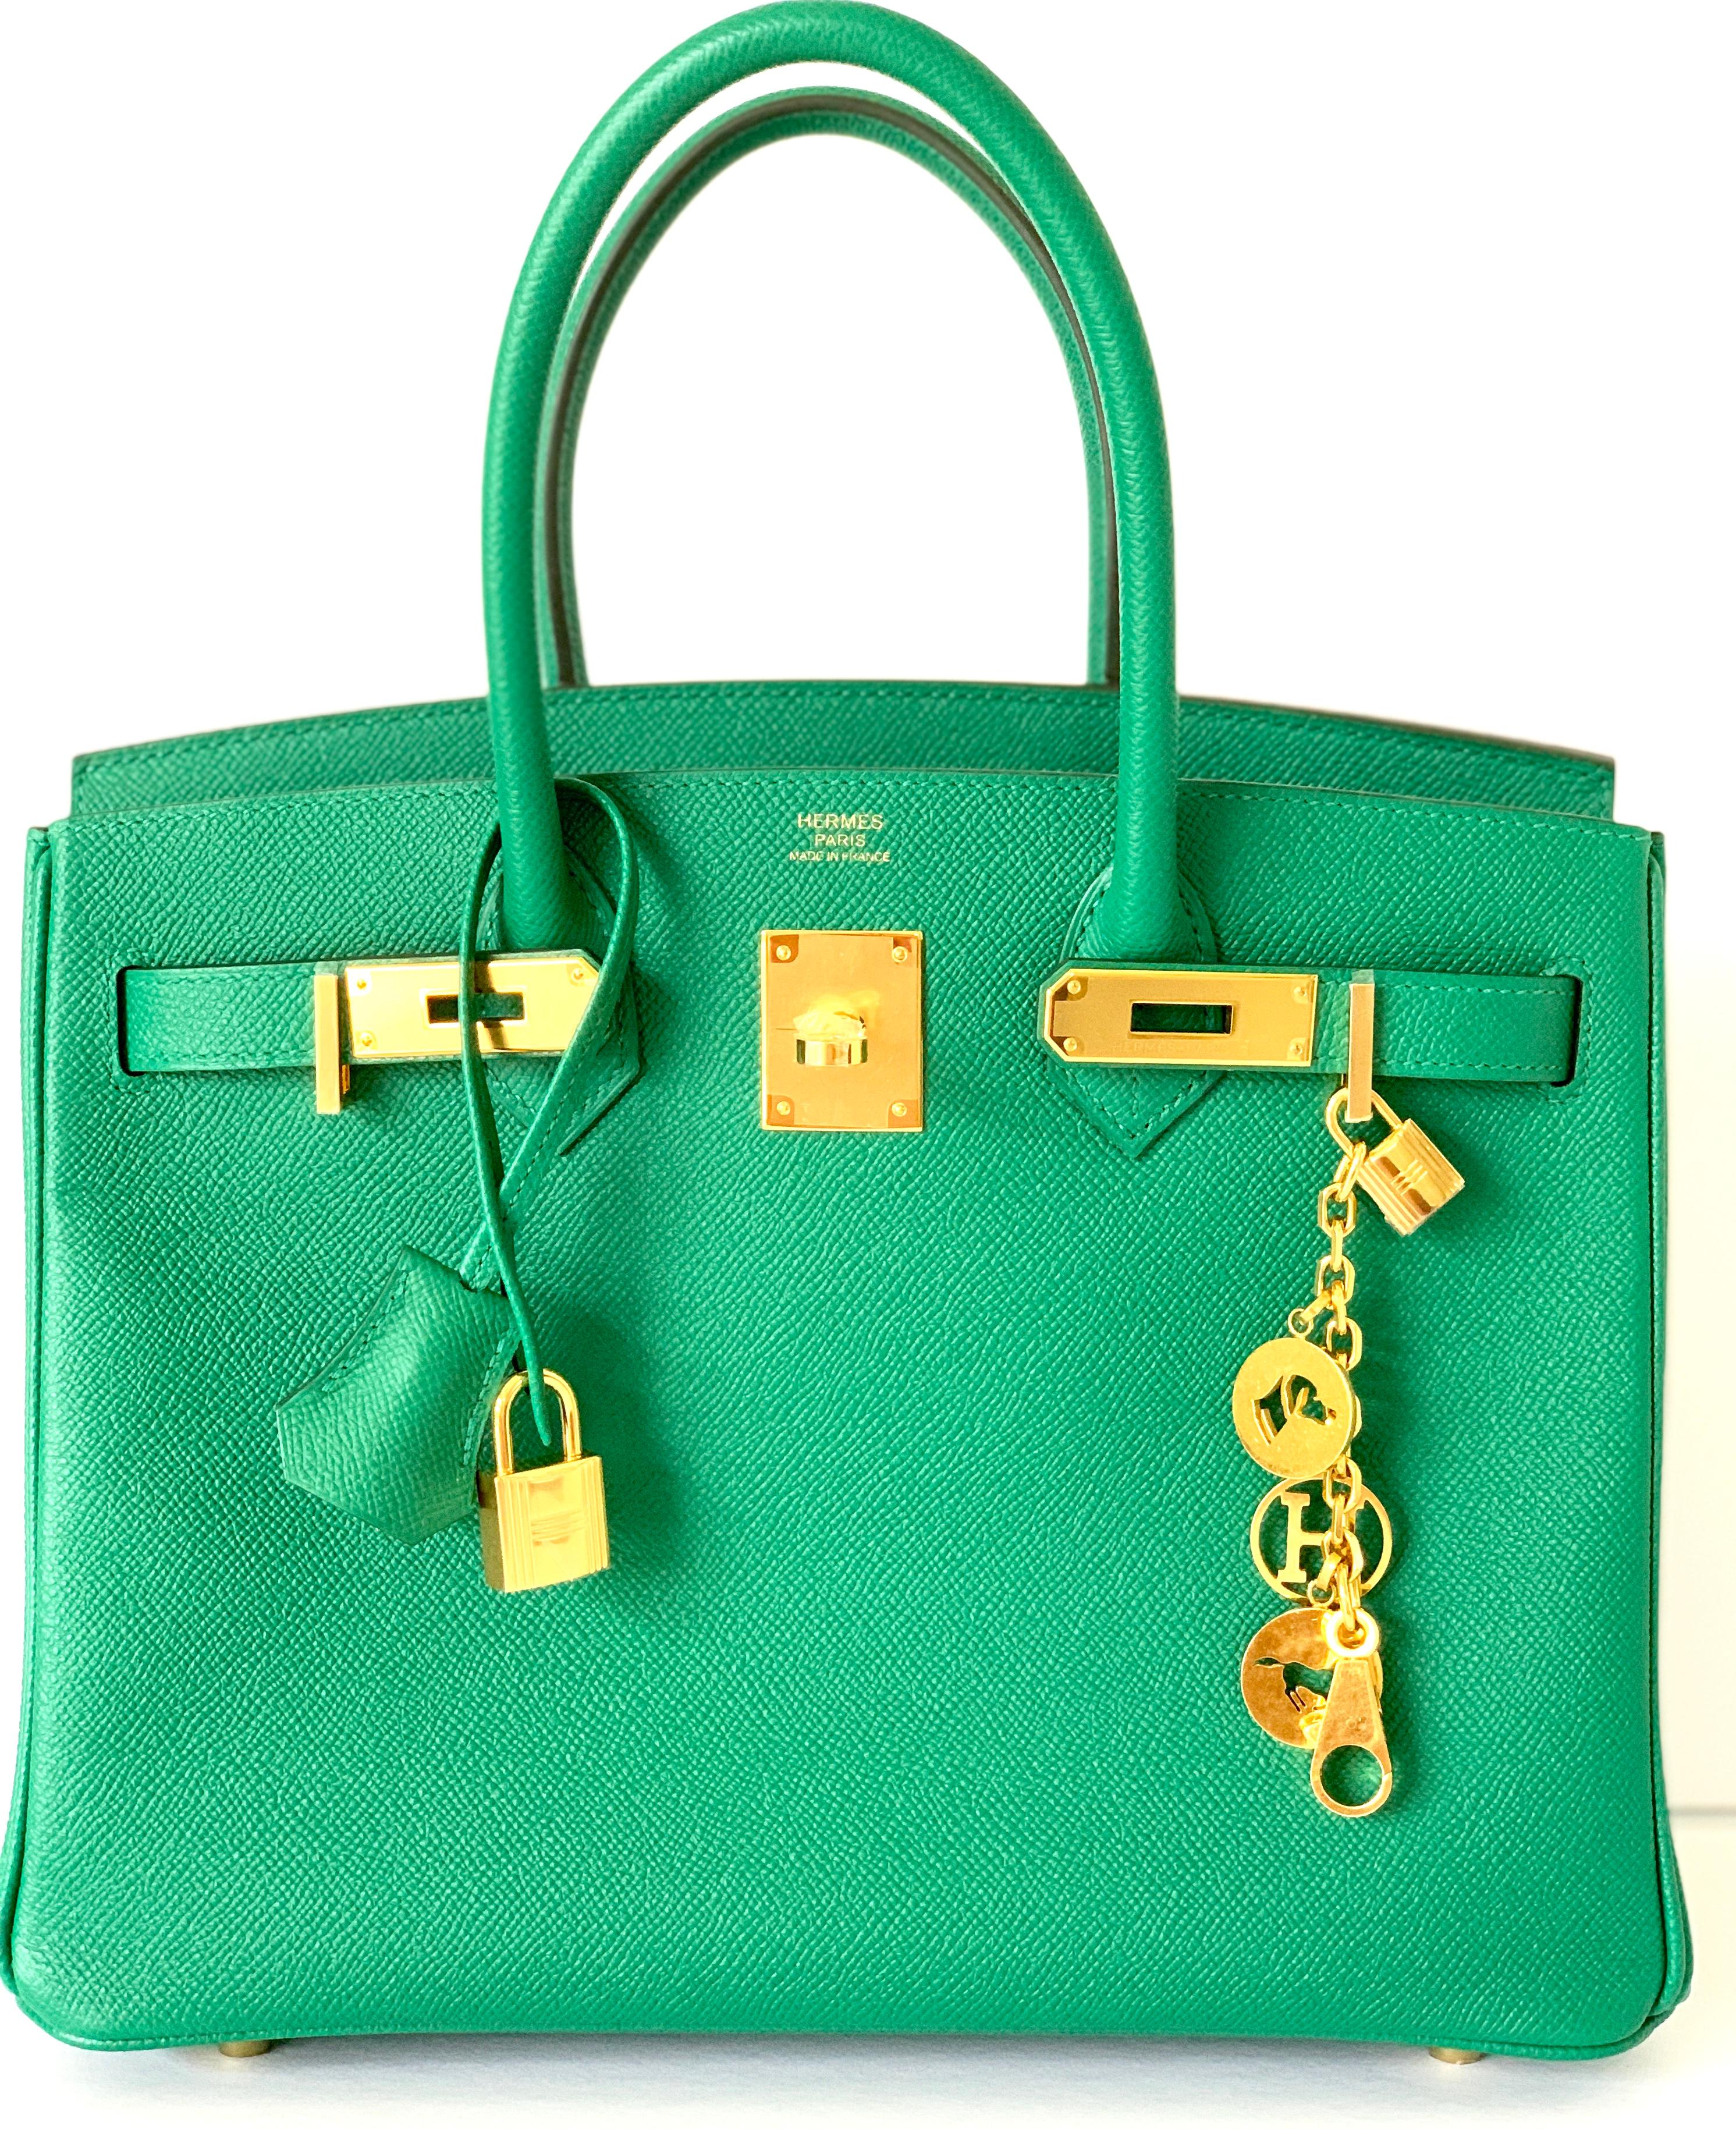 Hermes 30cm Birkin
Vert Vertigo Green, a beautiful emerald green jewel tone
Gold Hardware
Collection: D
The Breloque charms are not included in this auction!
Never worn, brand new, plastic on the hardware
Hermes Box, Dustcover, Lock and 2 keys,